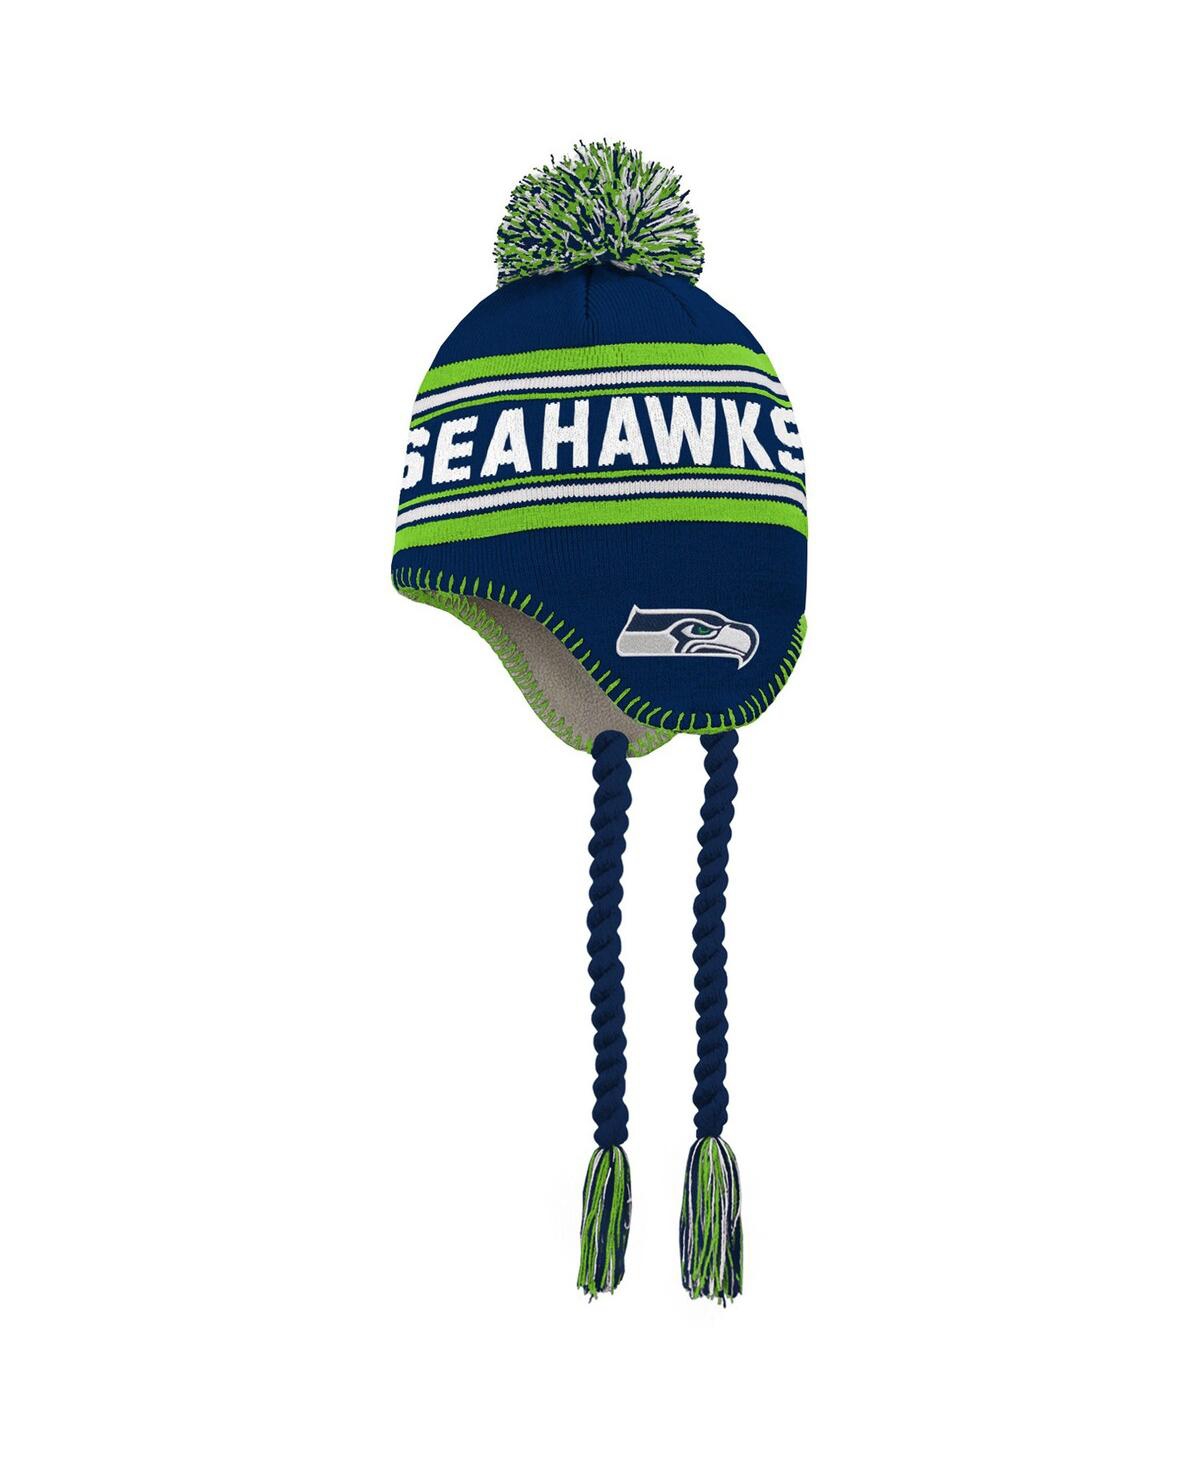 Outerstuff Babies' Preschool Boys And Girls College Navy And Neon Green Seattle Seahawks Jacquard Tassel Knit Hat With  In Navy,neon Green